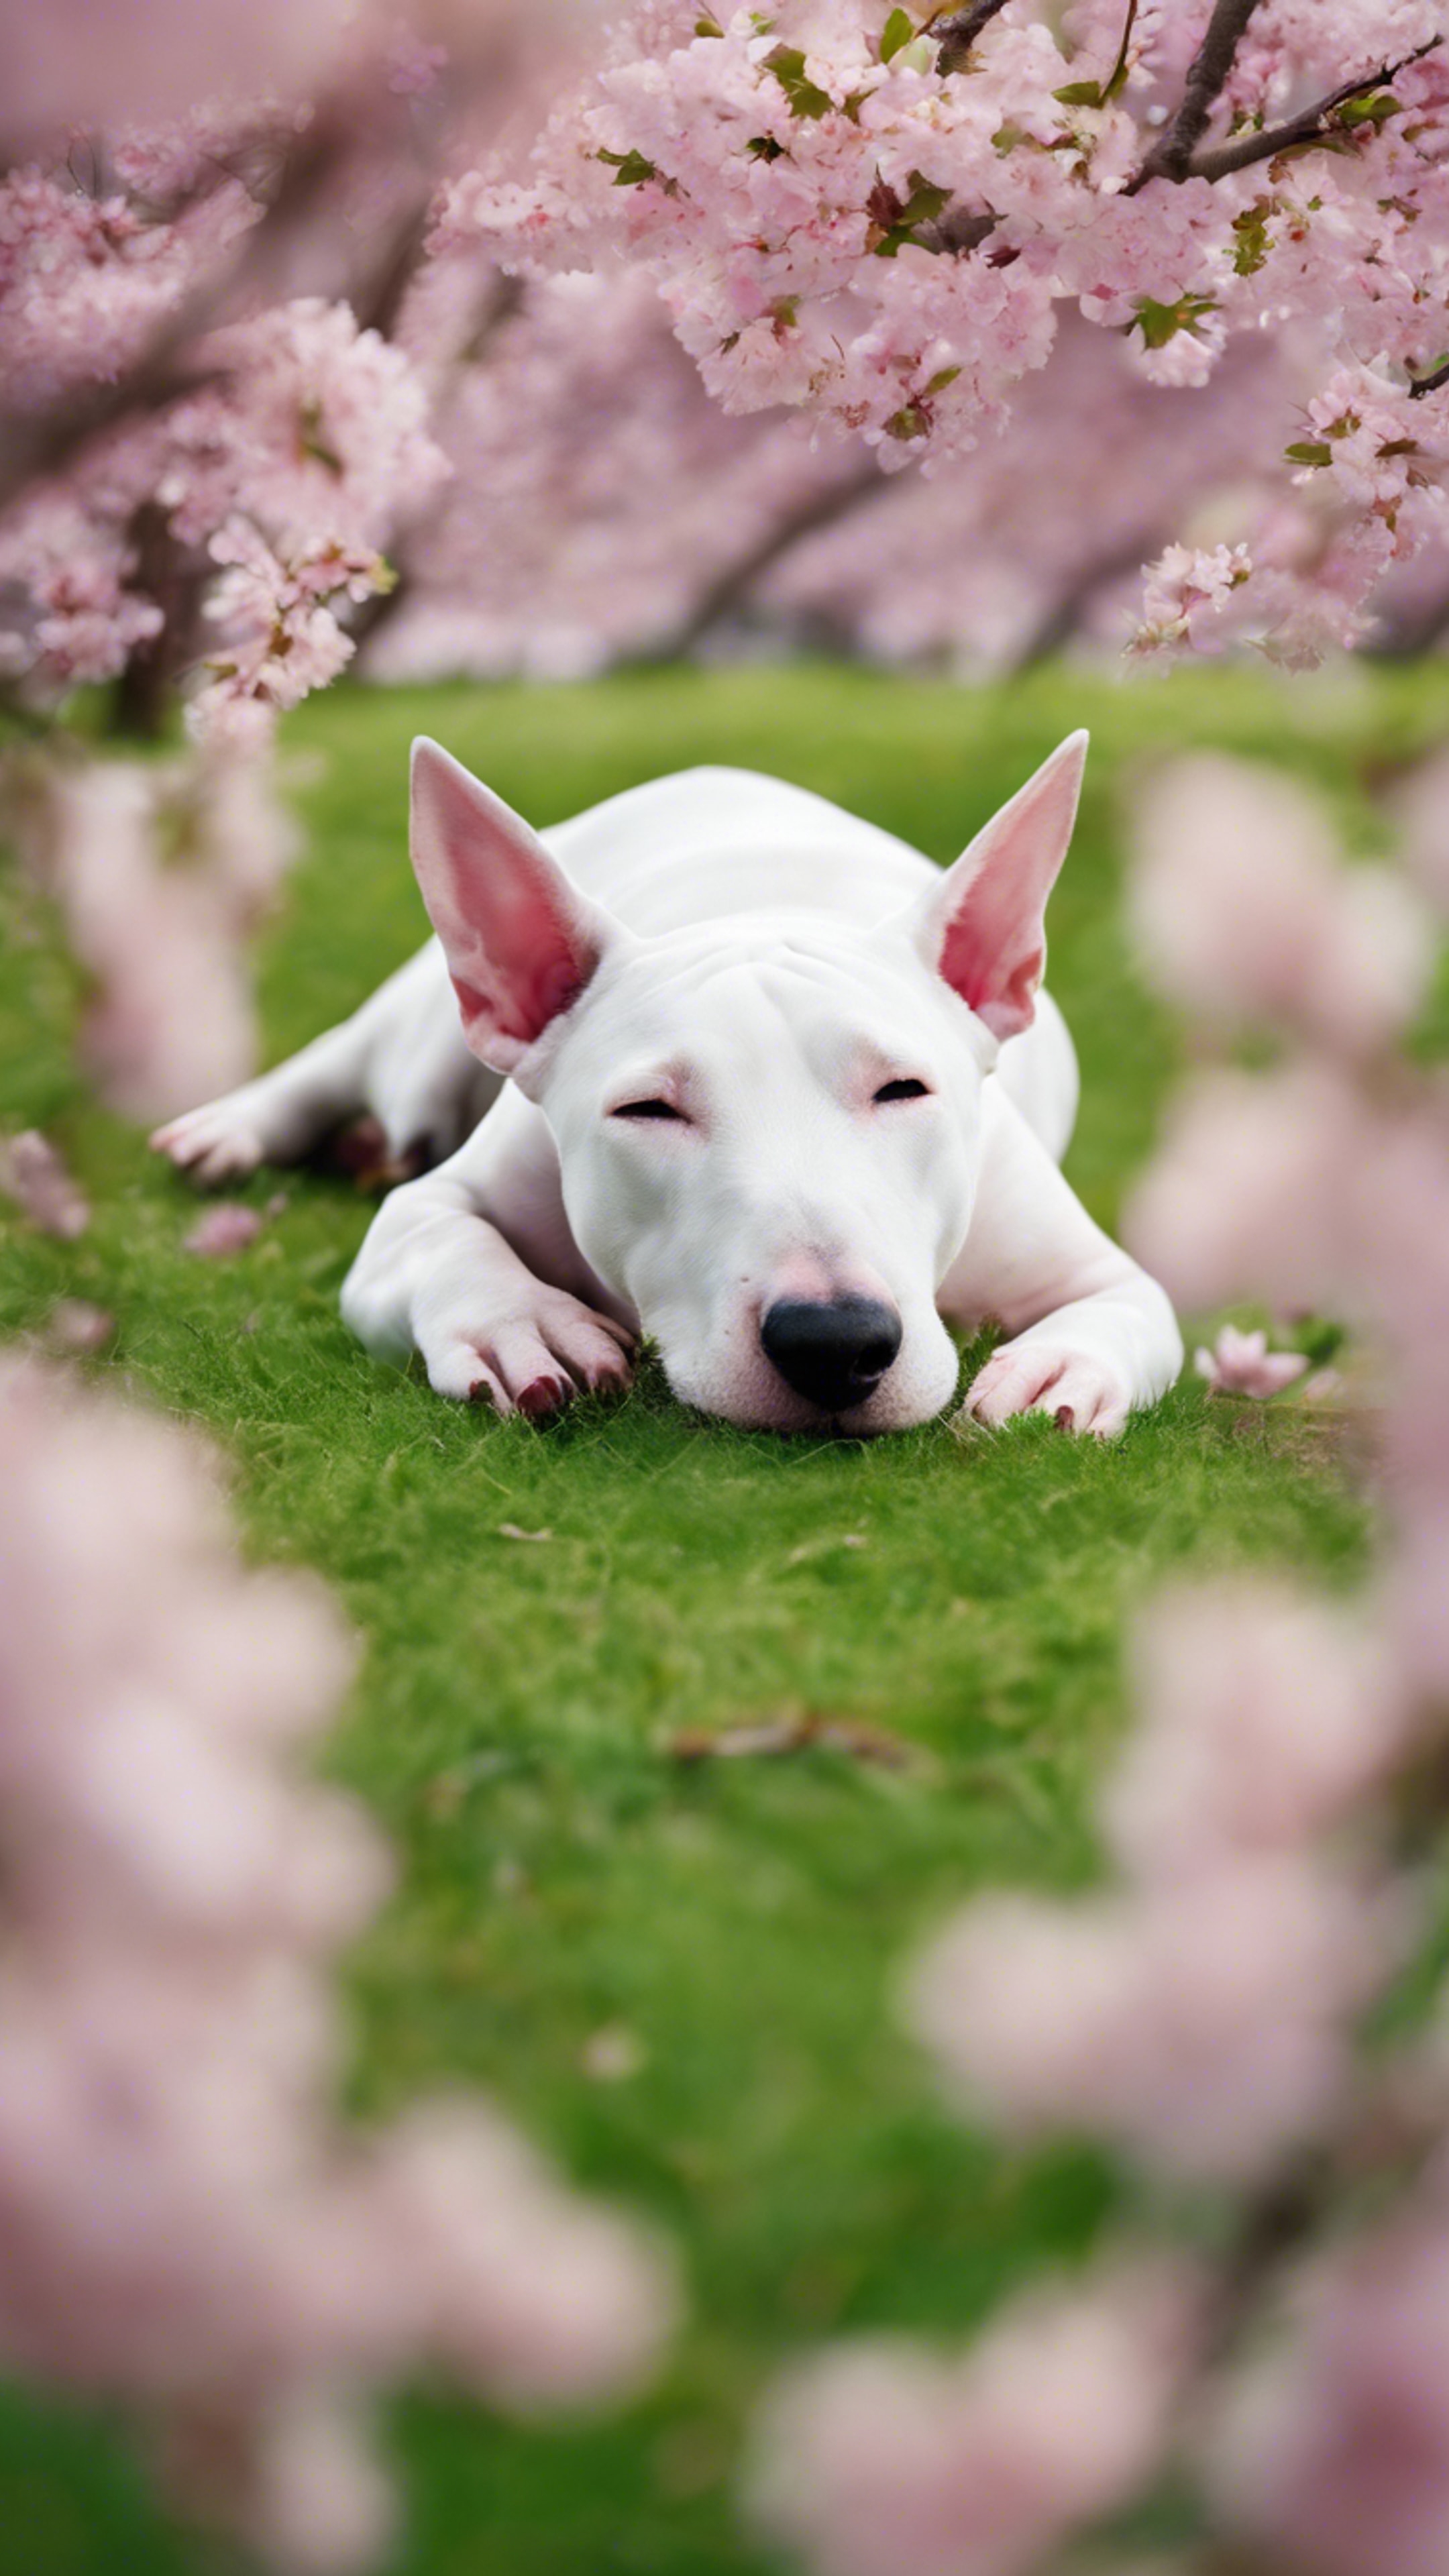 A Bull Terrier curled into a ball, sleeping in a bright green city park at the base of a cherry blossom tree.壁紙[3df408a3b3f7480298db]